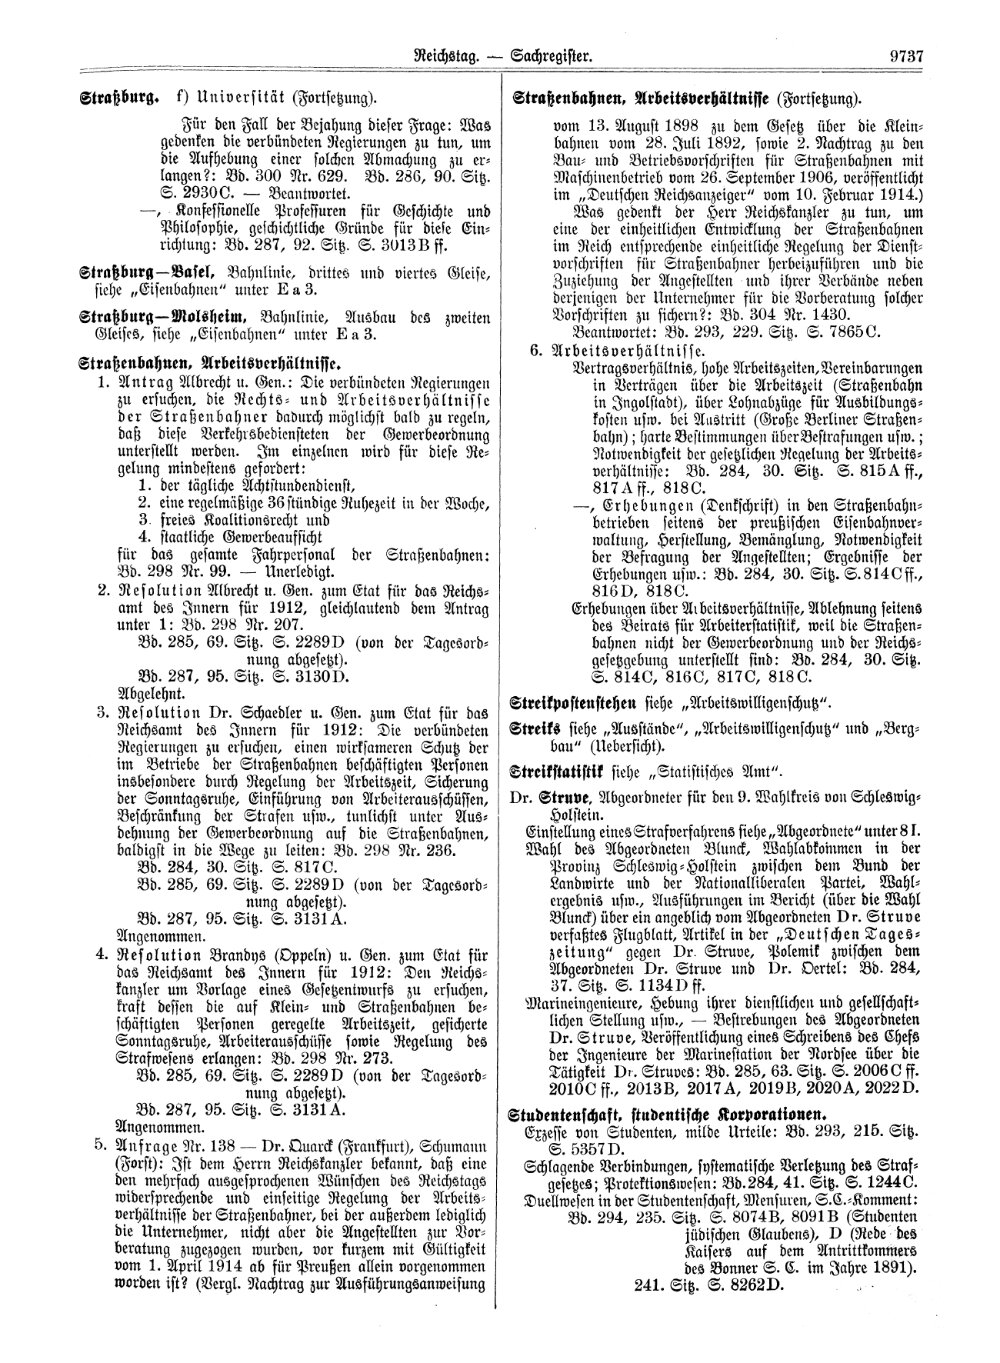 Scan of page 9737